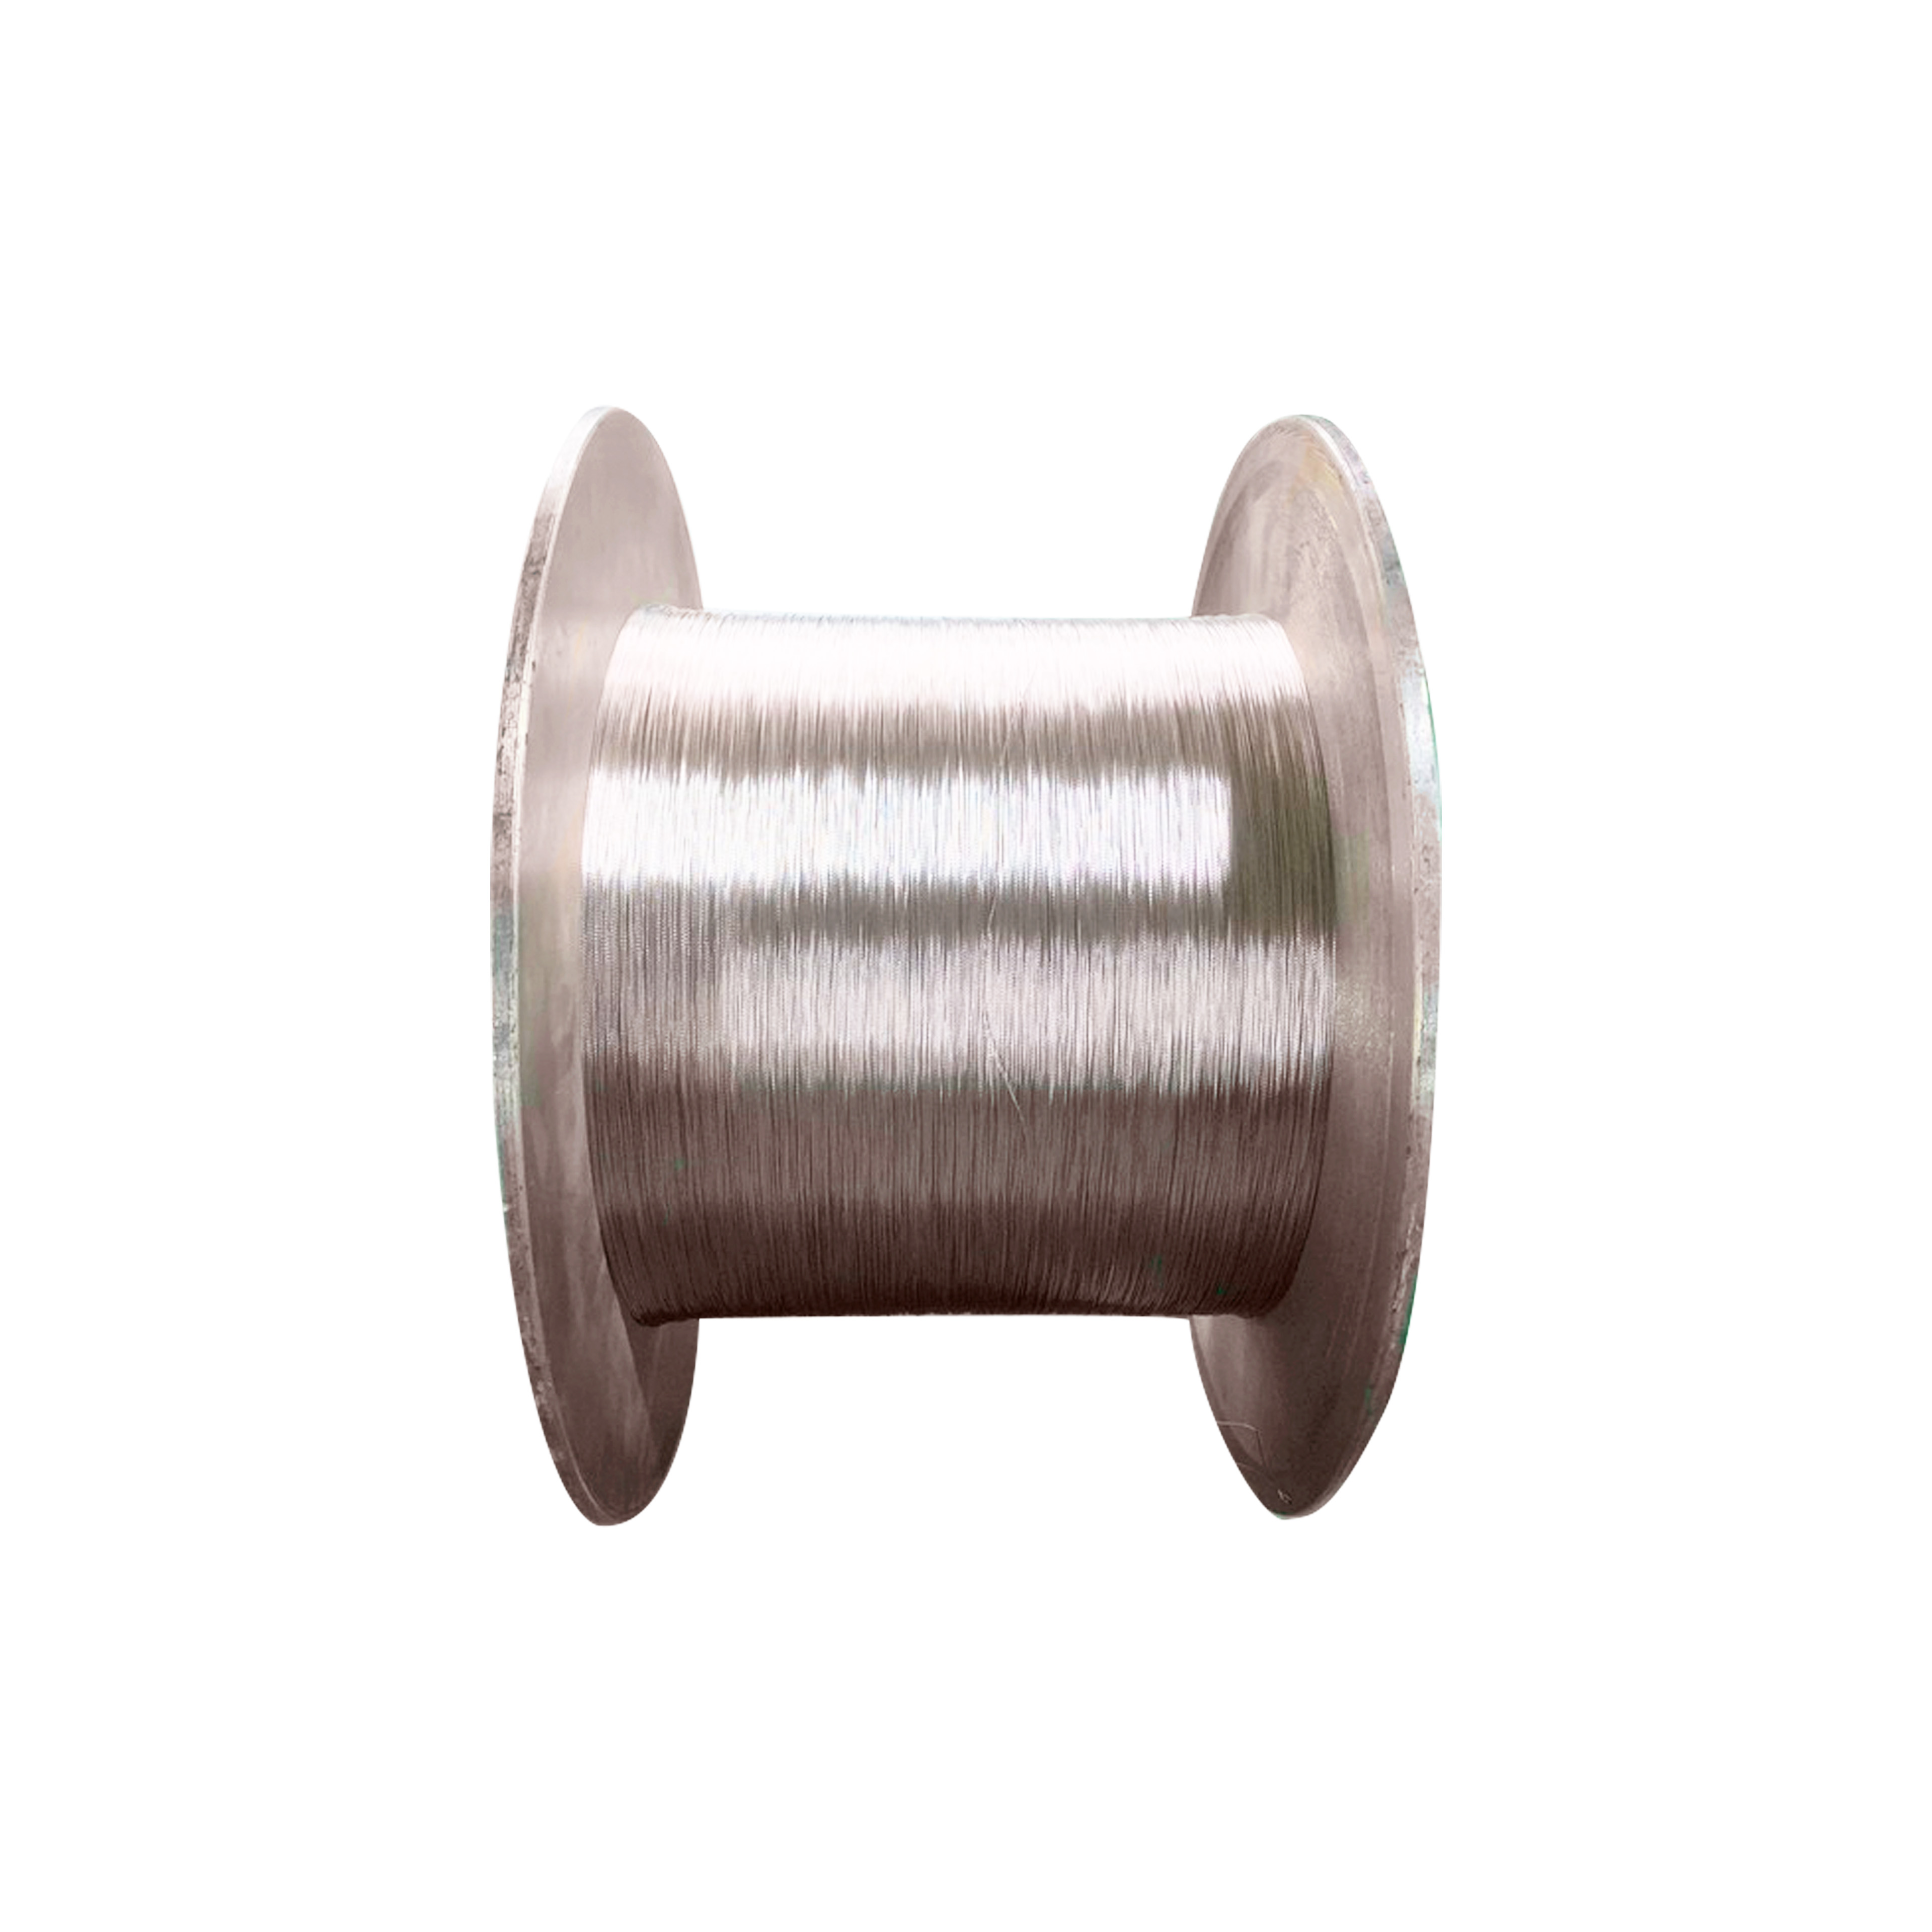 Popular Design for 29 Awg Silver Plated Copper Wire -
 High Conductivity Silver Plated Copper Wire For Transformer – Tianchuang